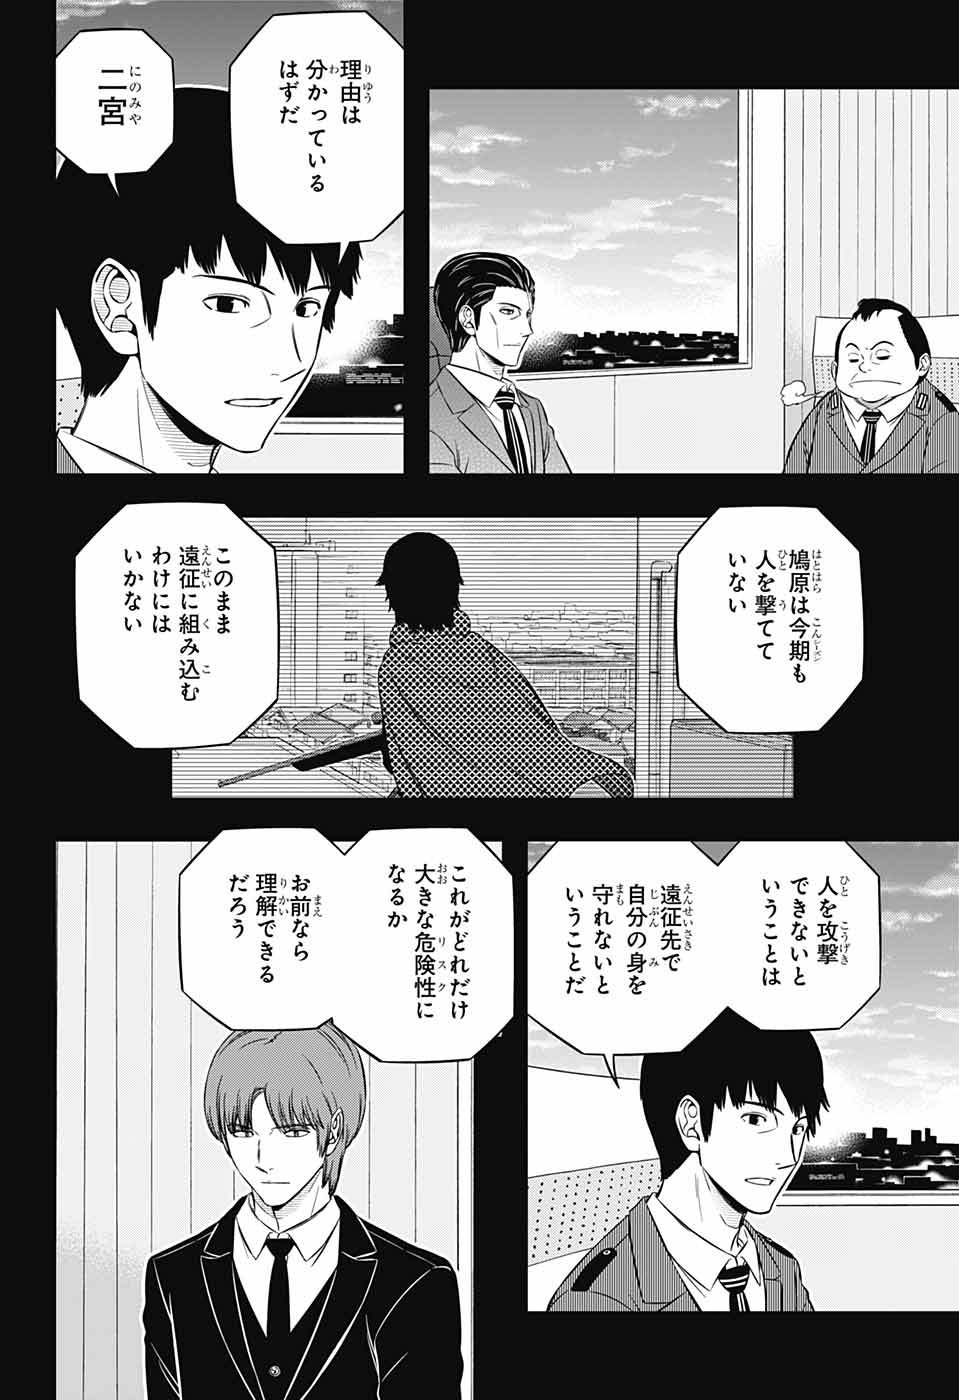 World Trigger - Chapter 236 - Page 2